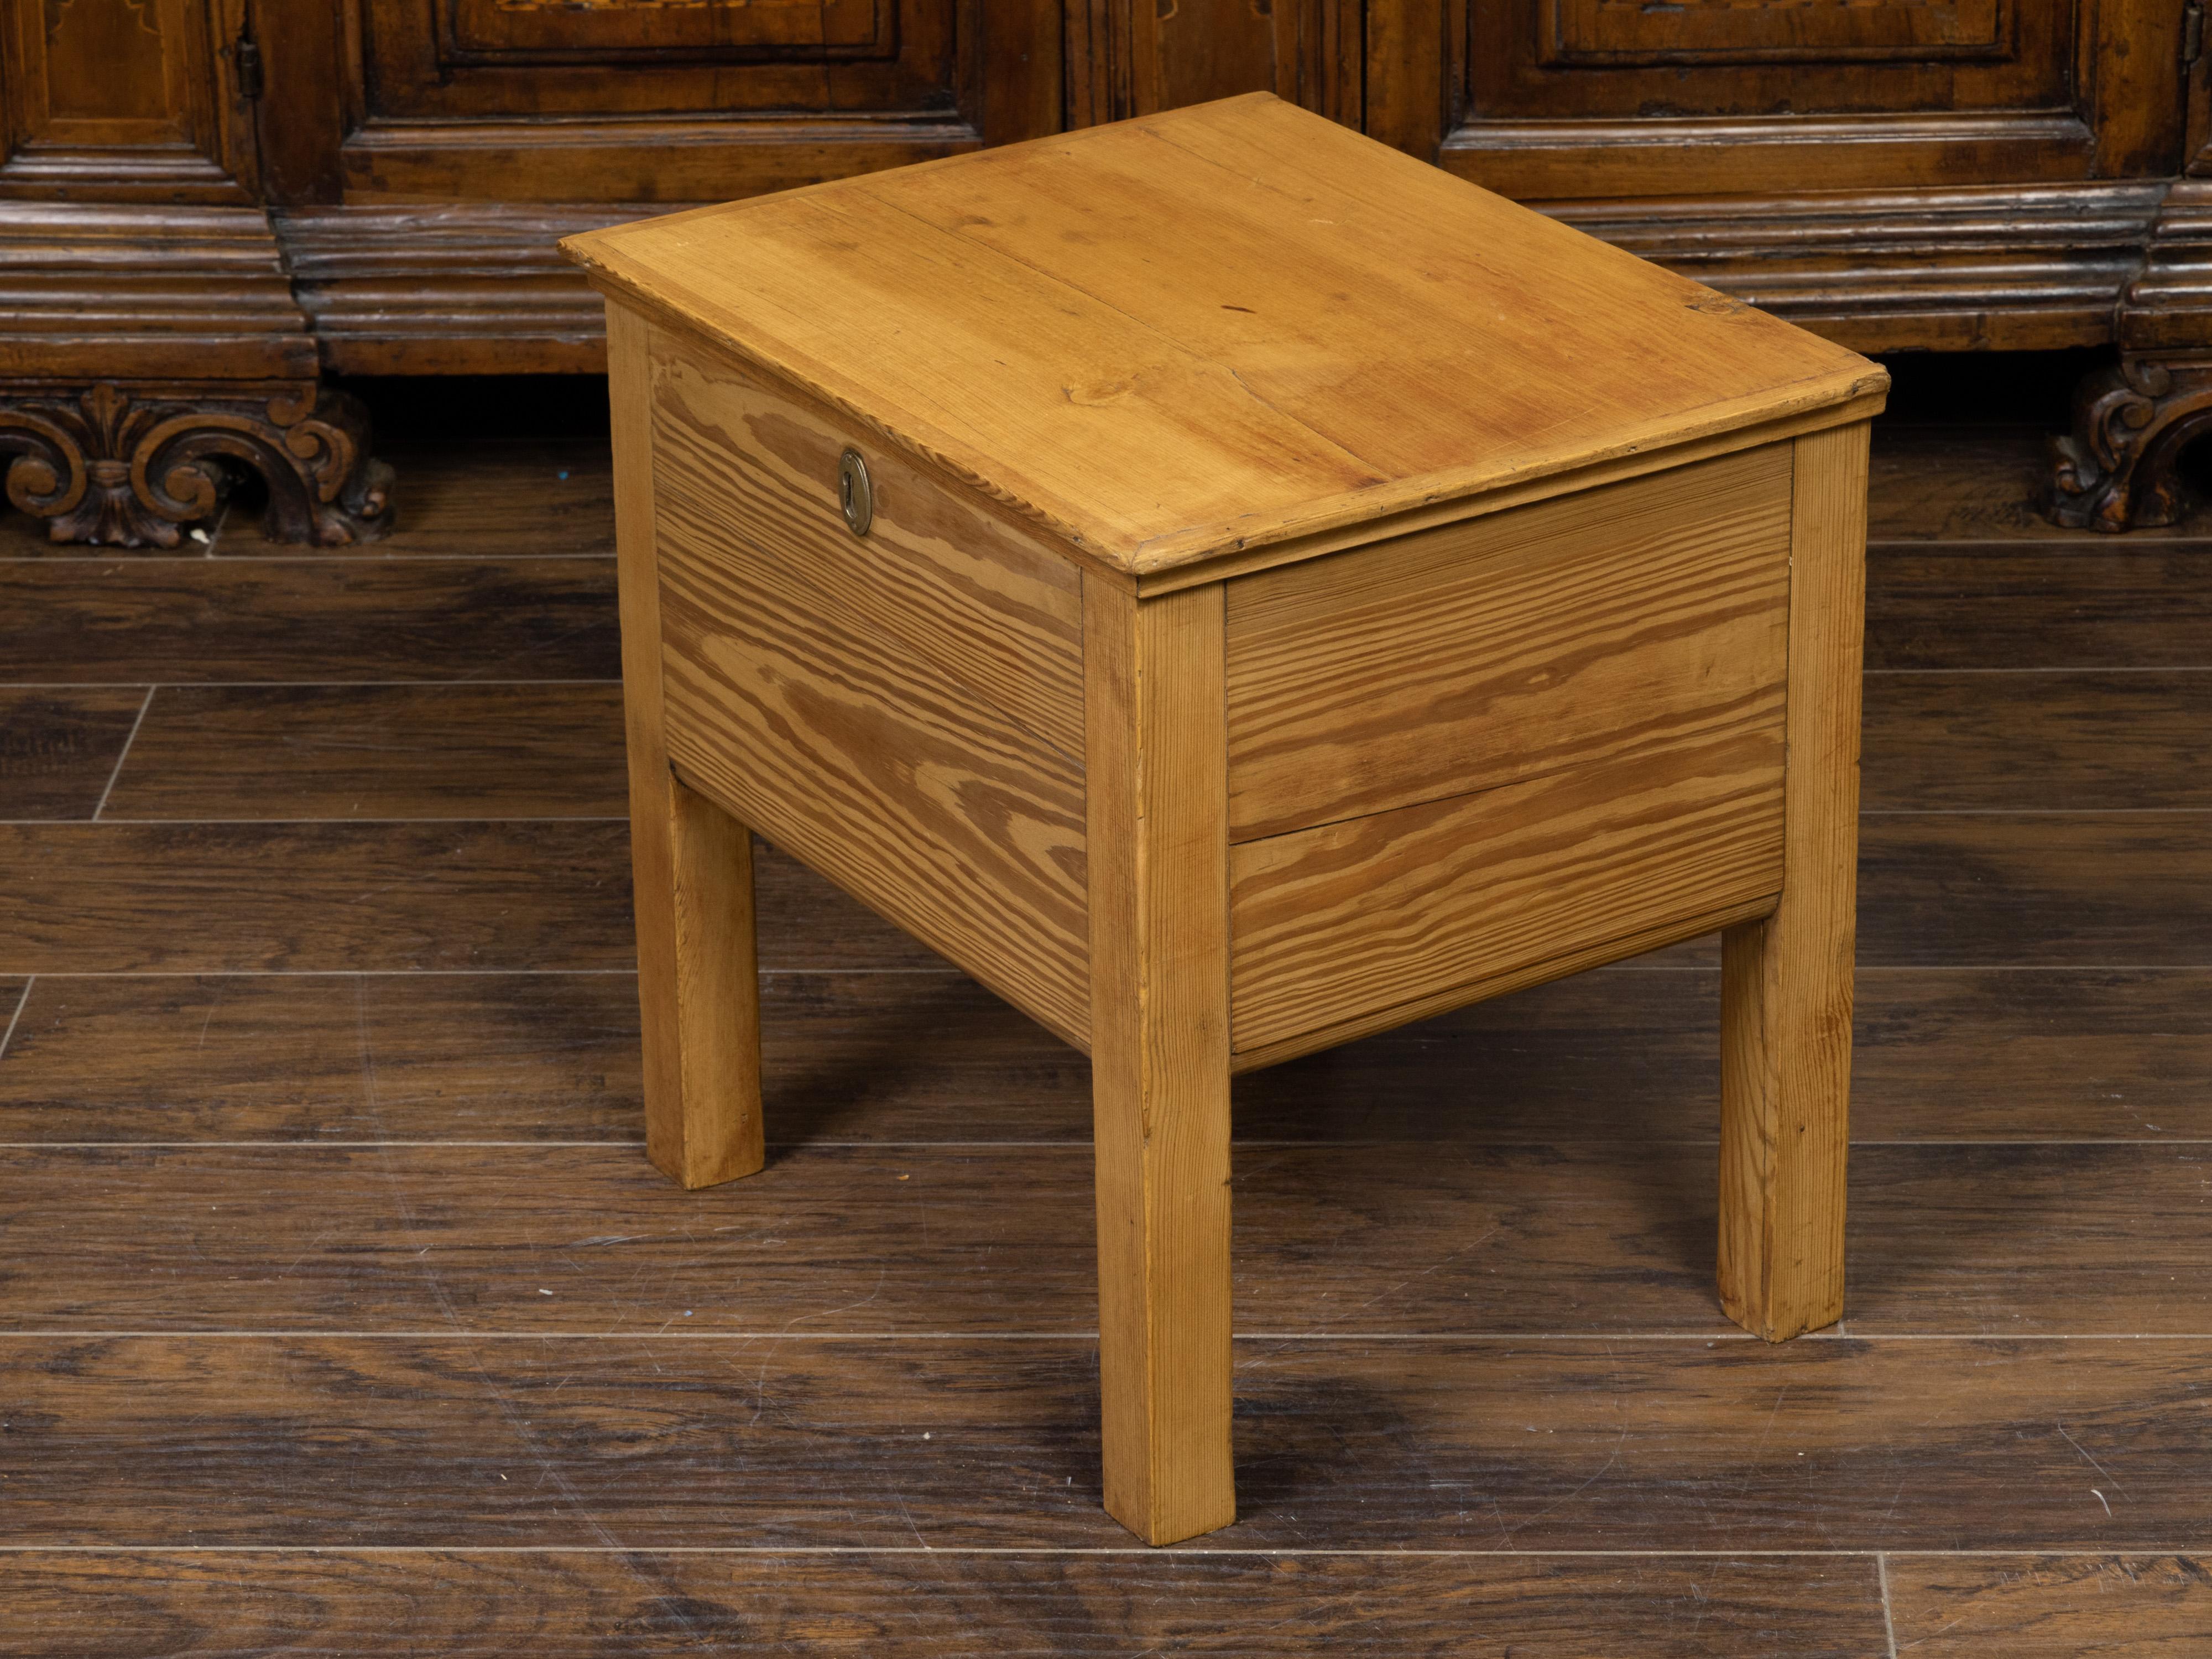 A rustic English pine box on legs from the early 20th century, with brass escutcheon. Created in England during the early years of the 20th century, this pine box features a rectangular hinged lid that lifts up to reveal a convenient storage space.